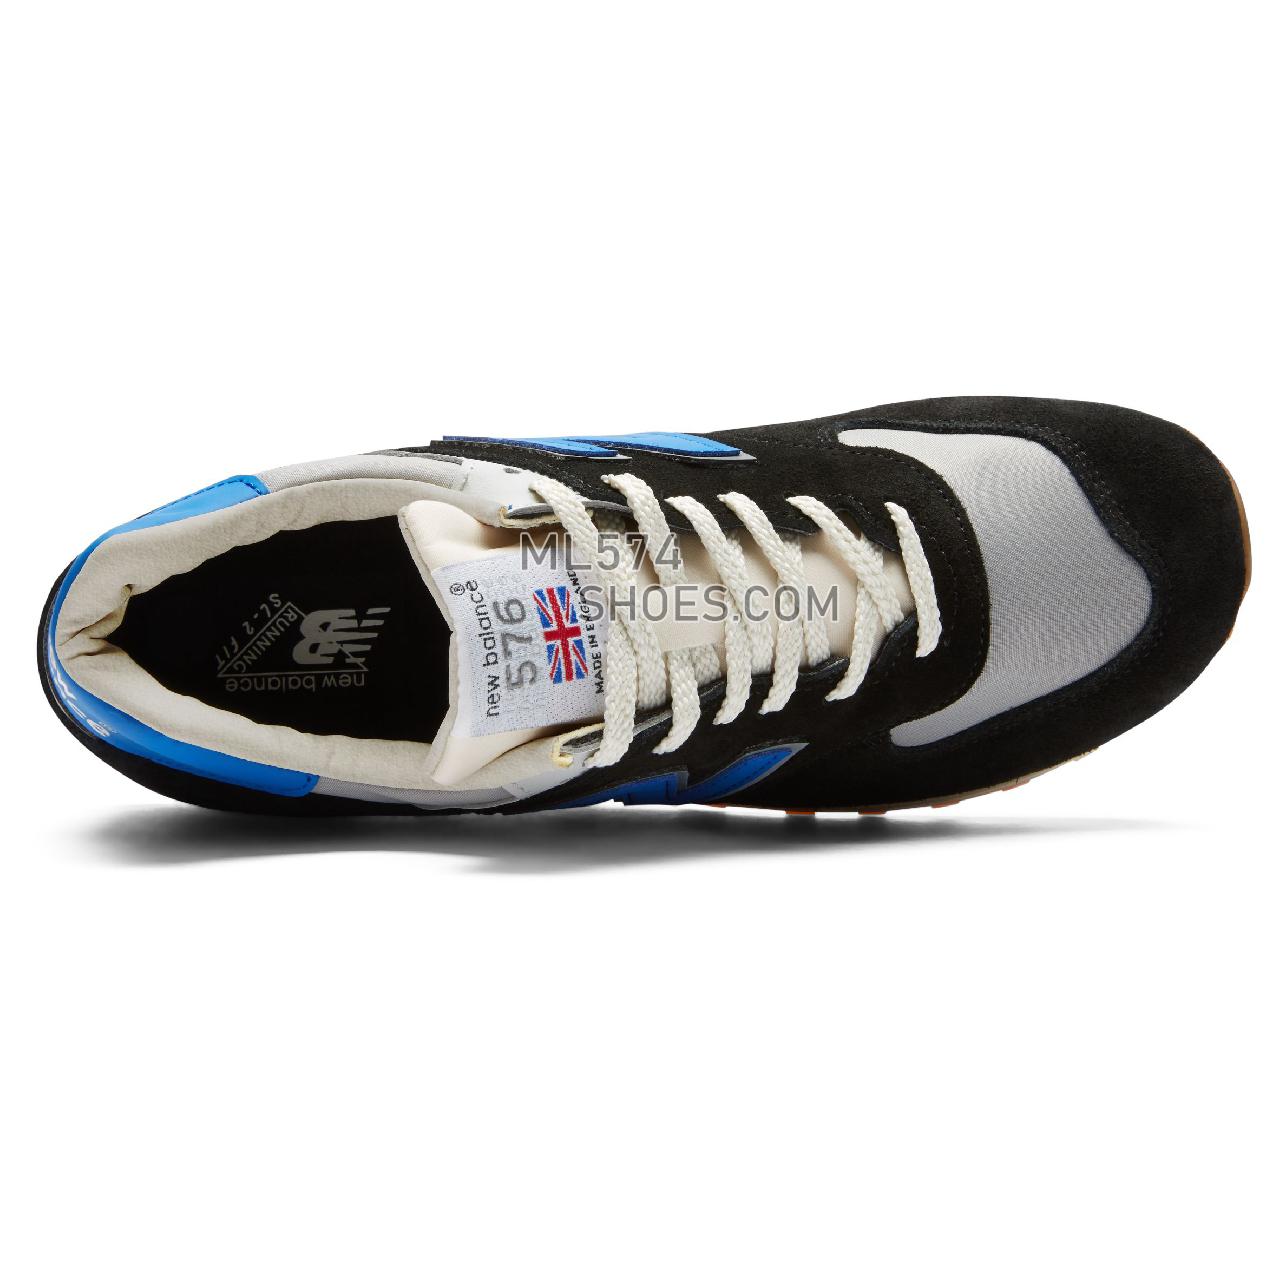 New Balance Made in UK 576 - Men's 576 Made in UK Classic M576-SN - Black with Grey and Blue - M576TNF